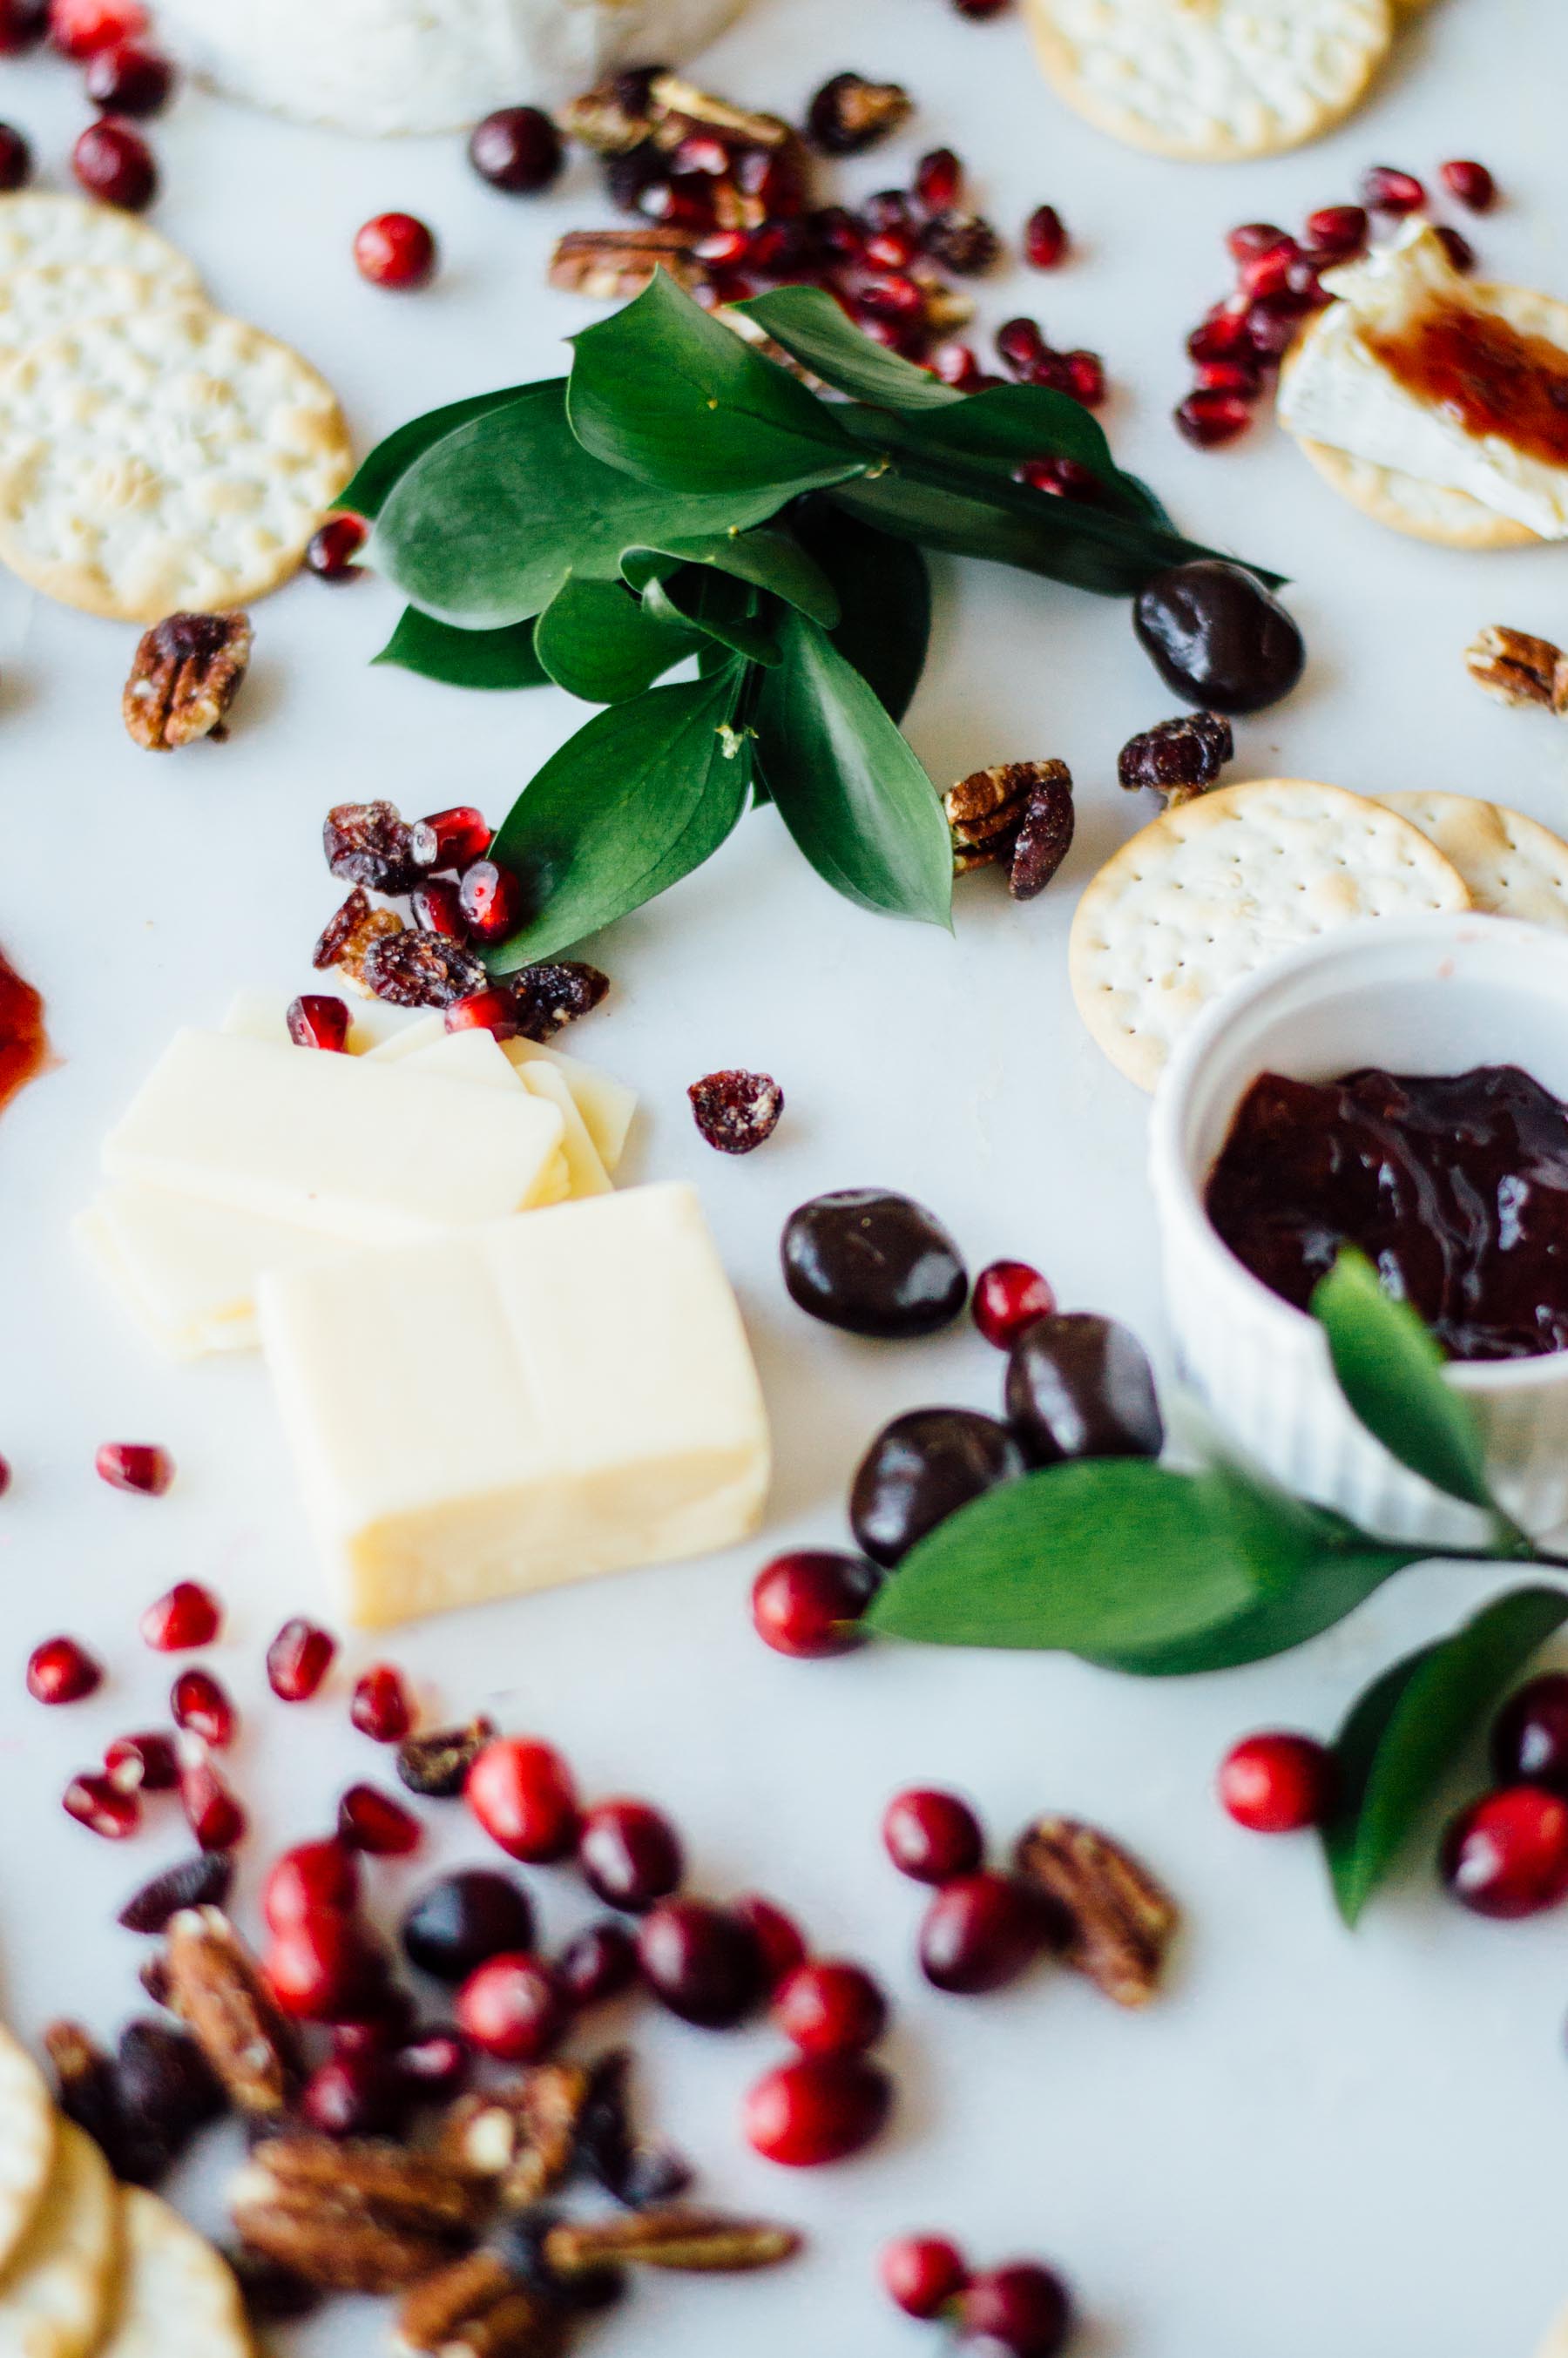 How to fill up your holiday party spread AND prep for the party in under 1 hour. Yes, it is possible! | bygabriella.co